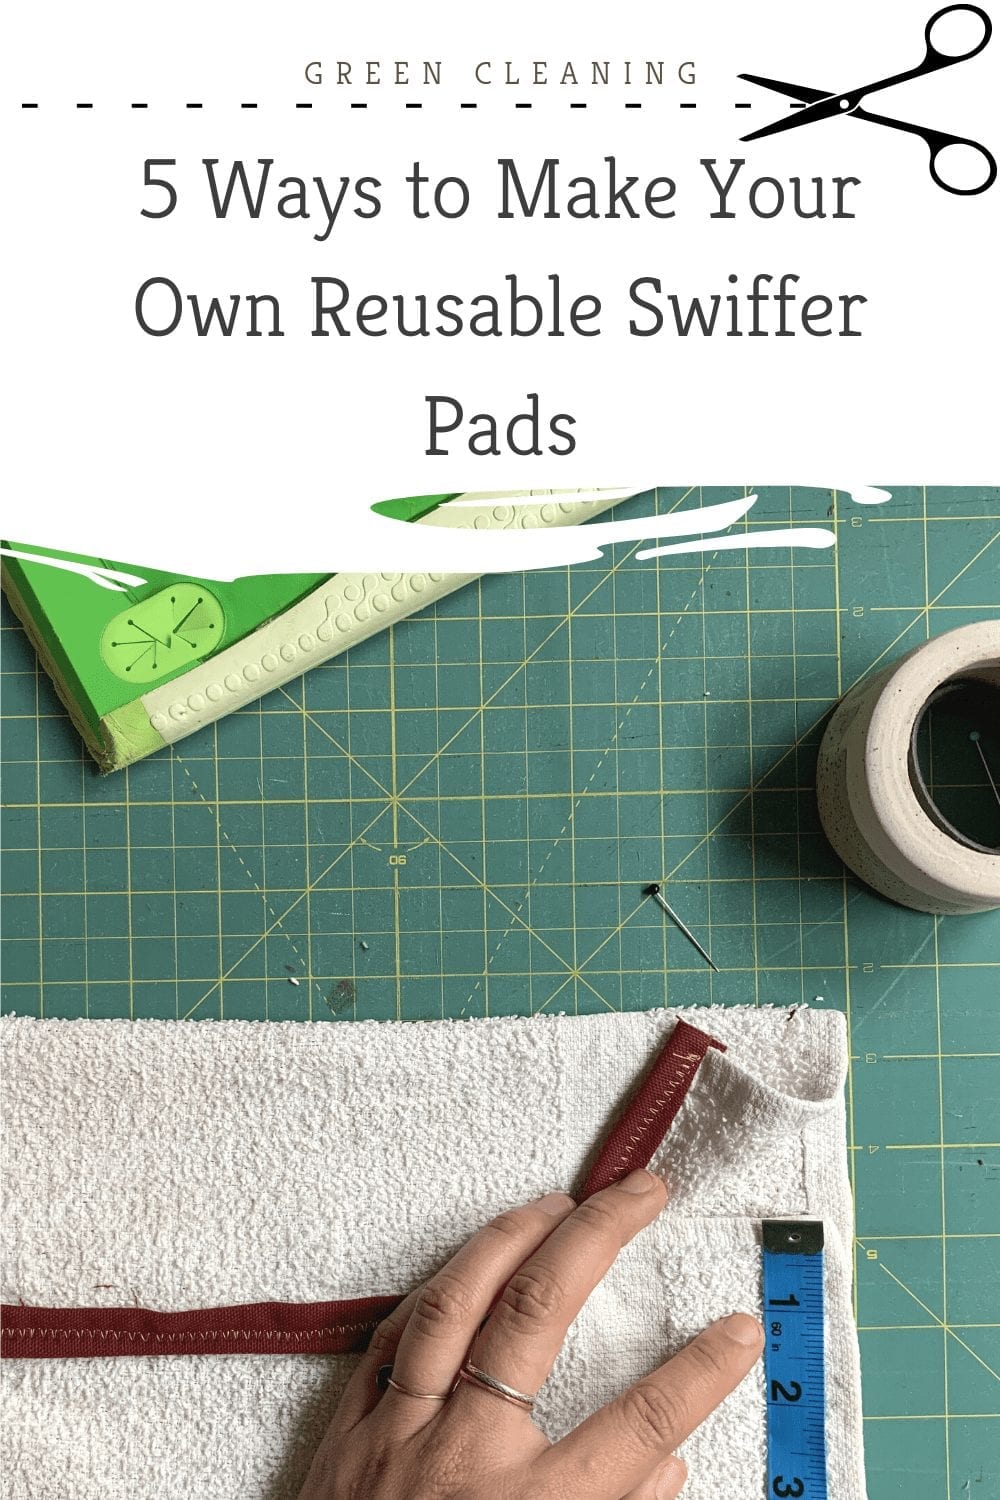 5 Ways to Make Your Own Reusable Swiffer Pads